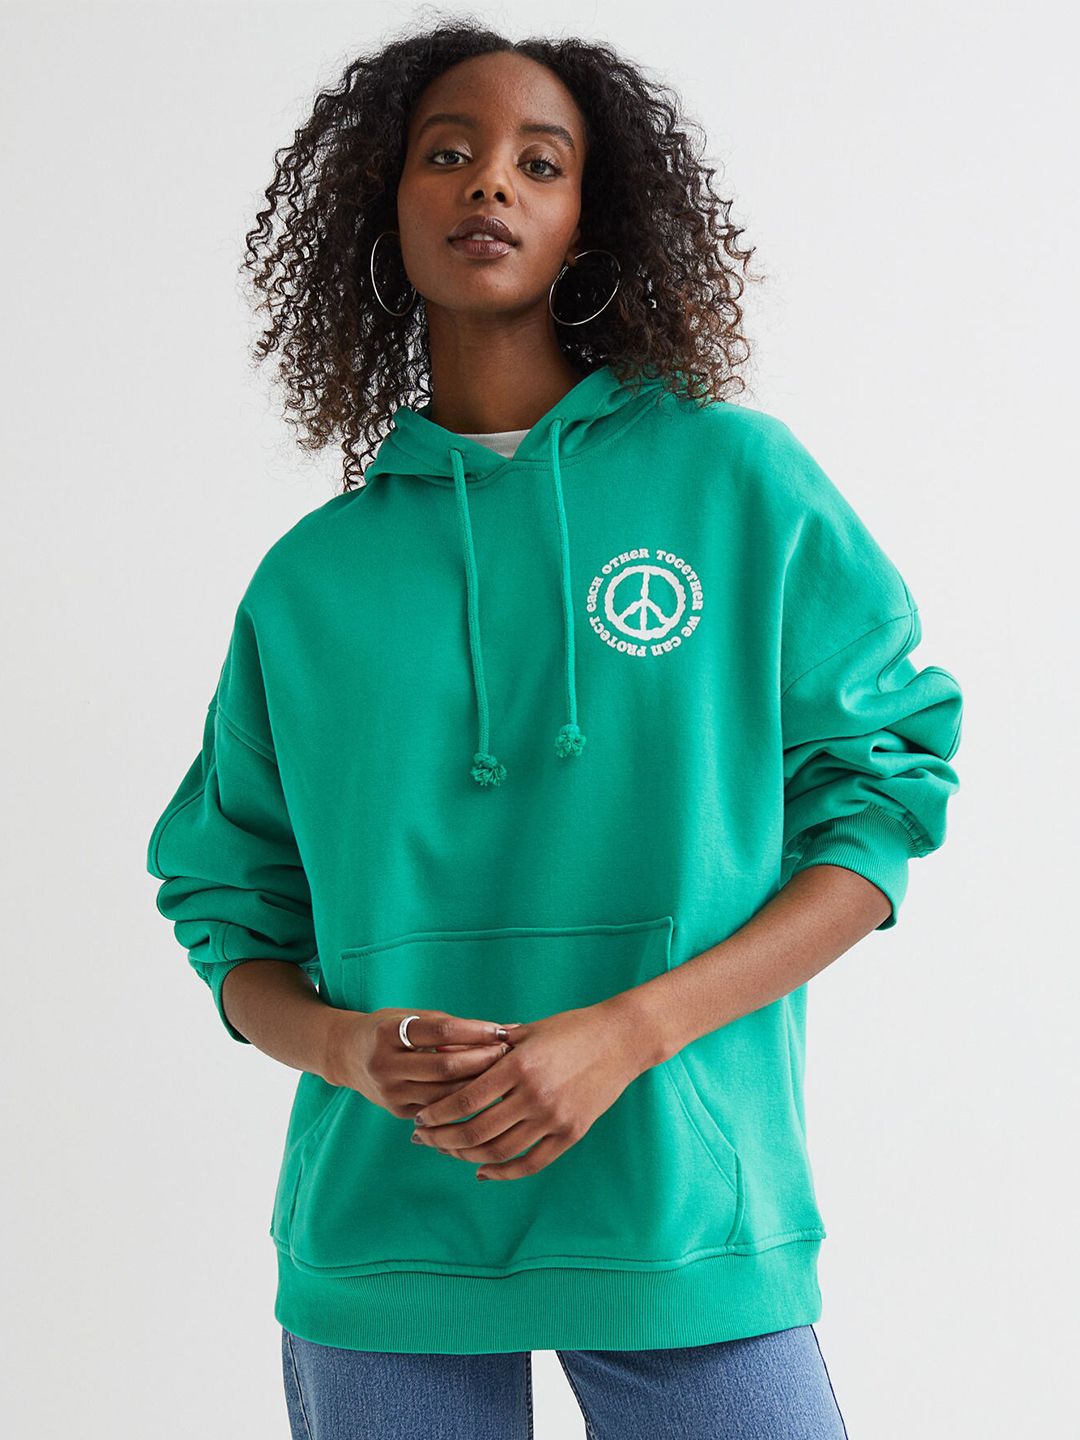 H&M Women Green & White Printed Oversized Hoodie Price in India